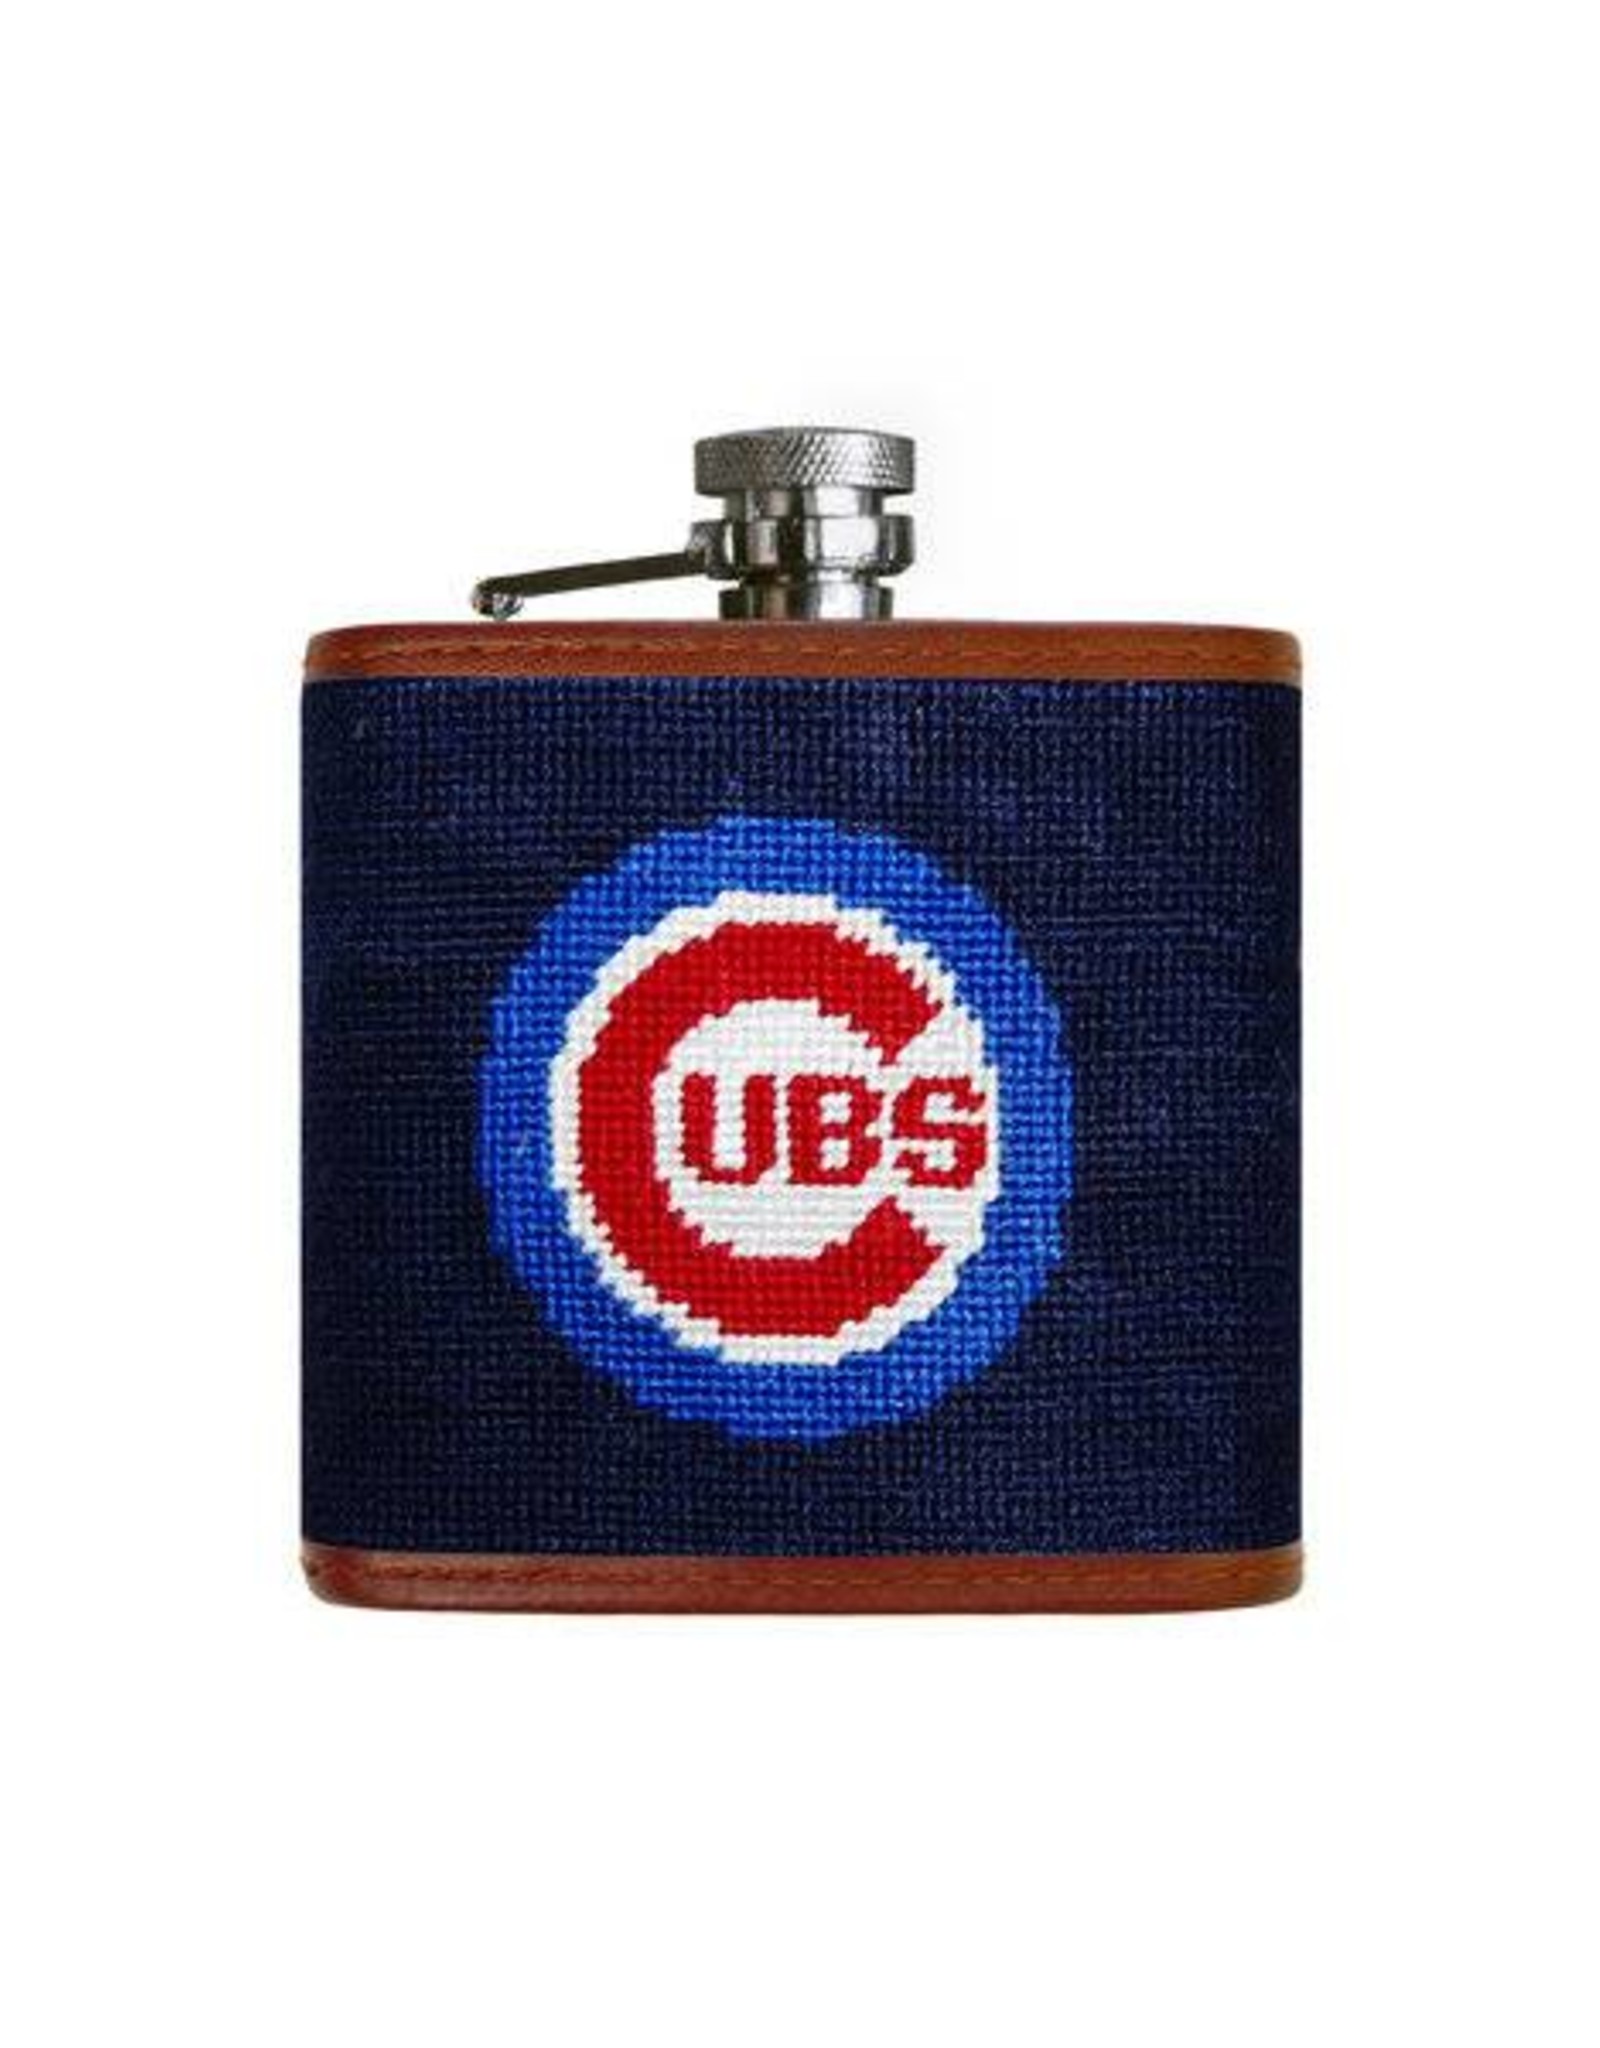 Smather's & Branson Flask Cubs